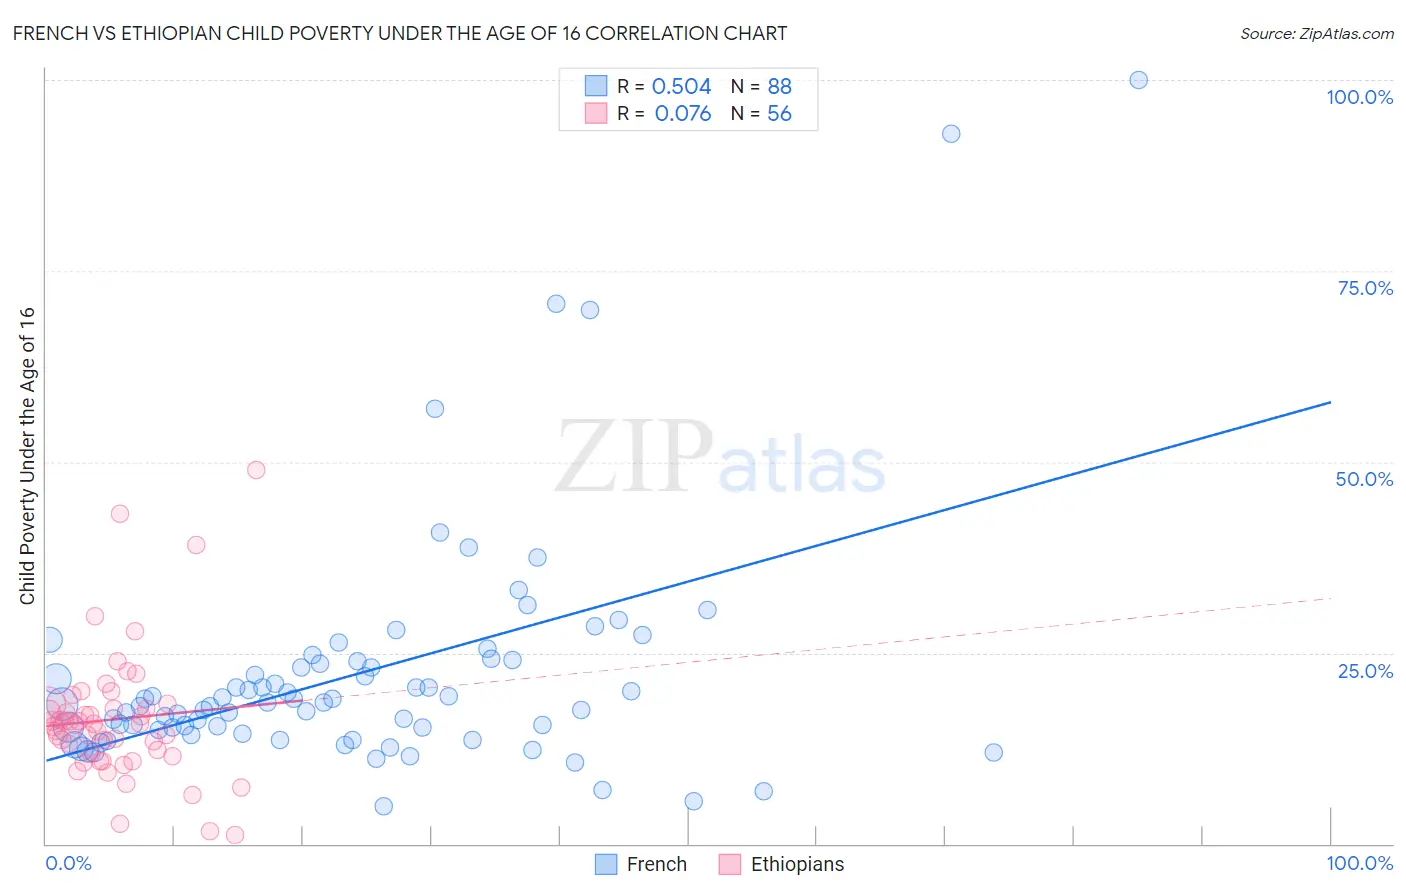 French vs Ethiopian Child Poverty Under the Age of 16